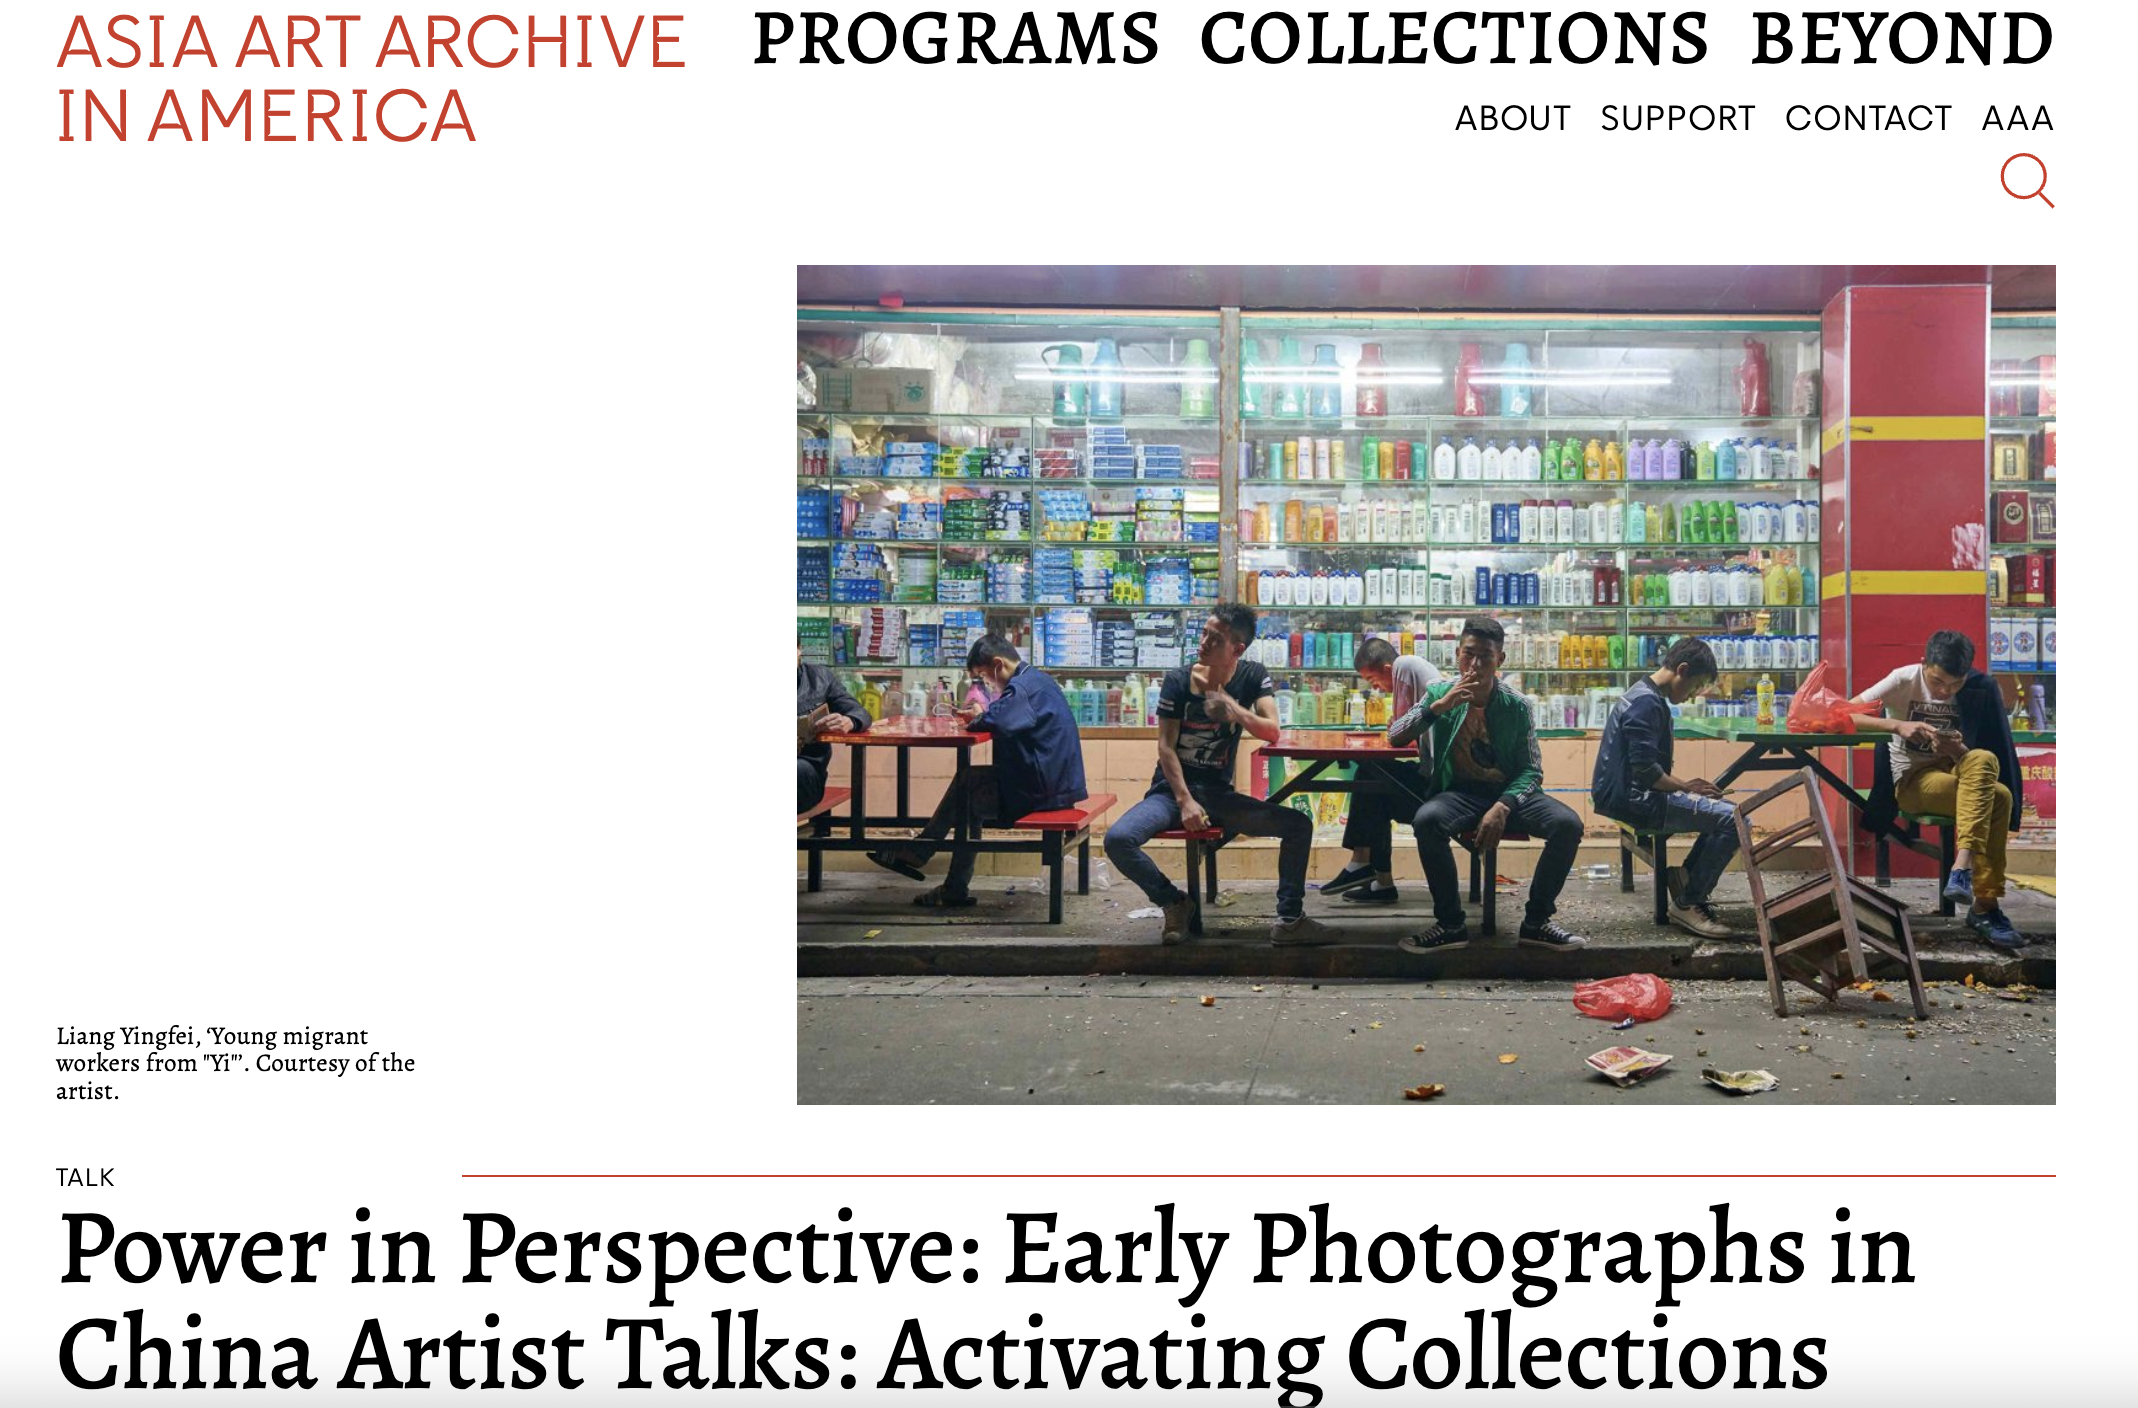 Power in Perspective: Early Photographs in China Artist Talks: Activating Collections